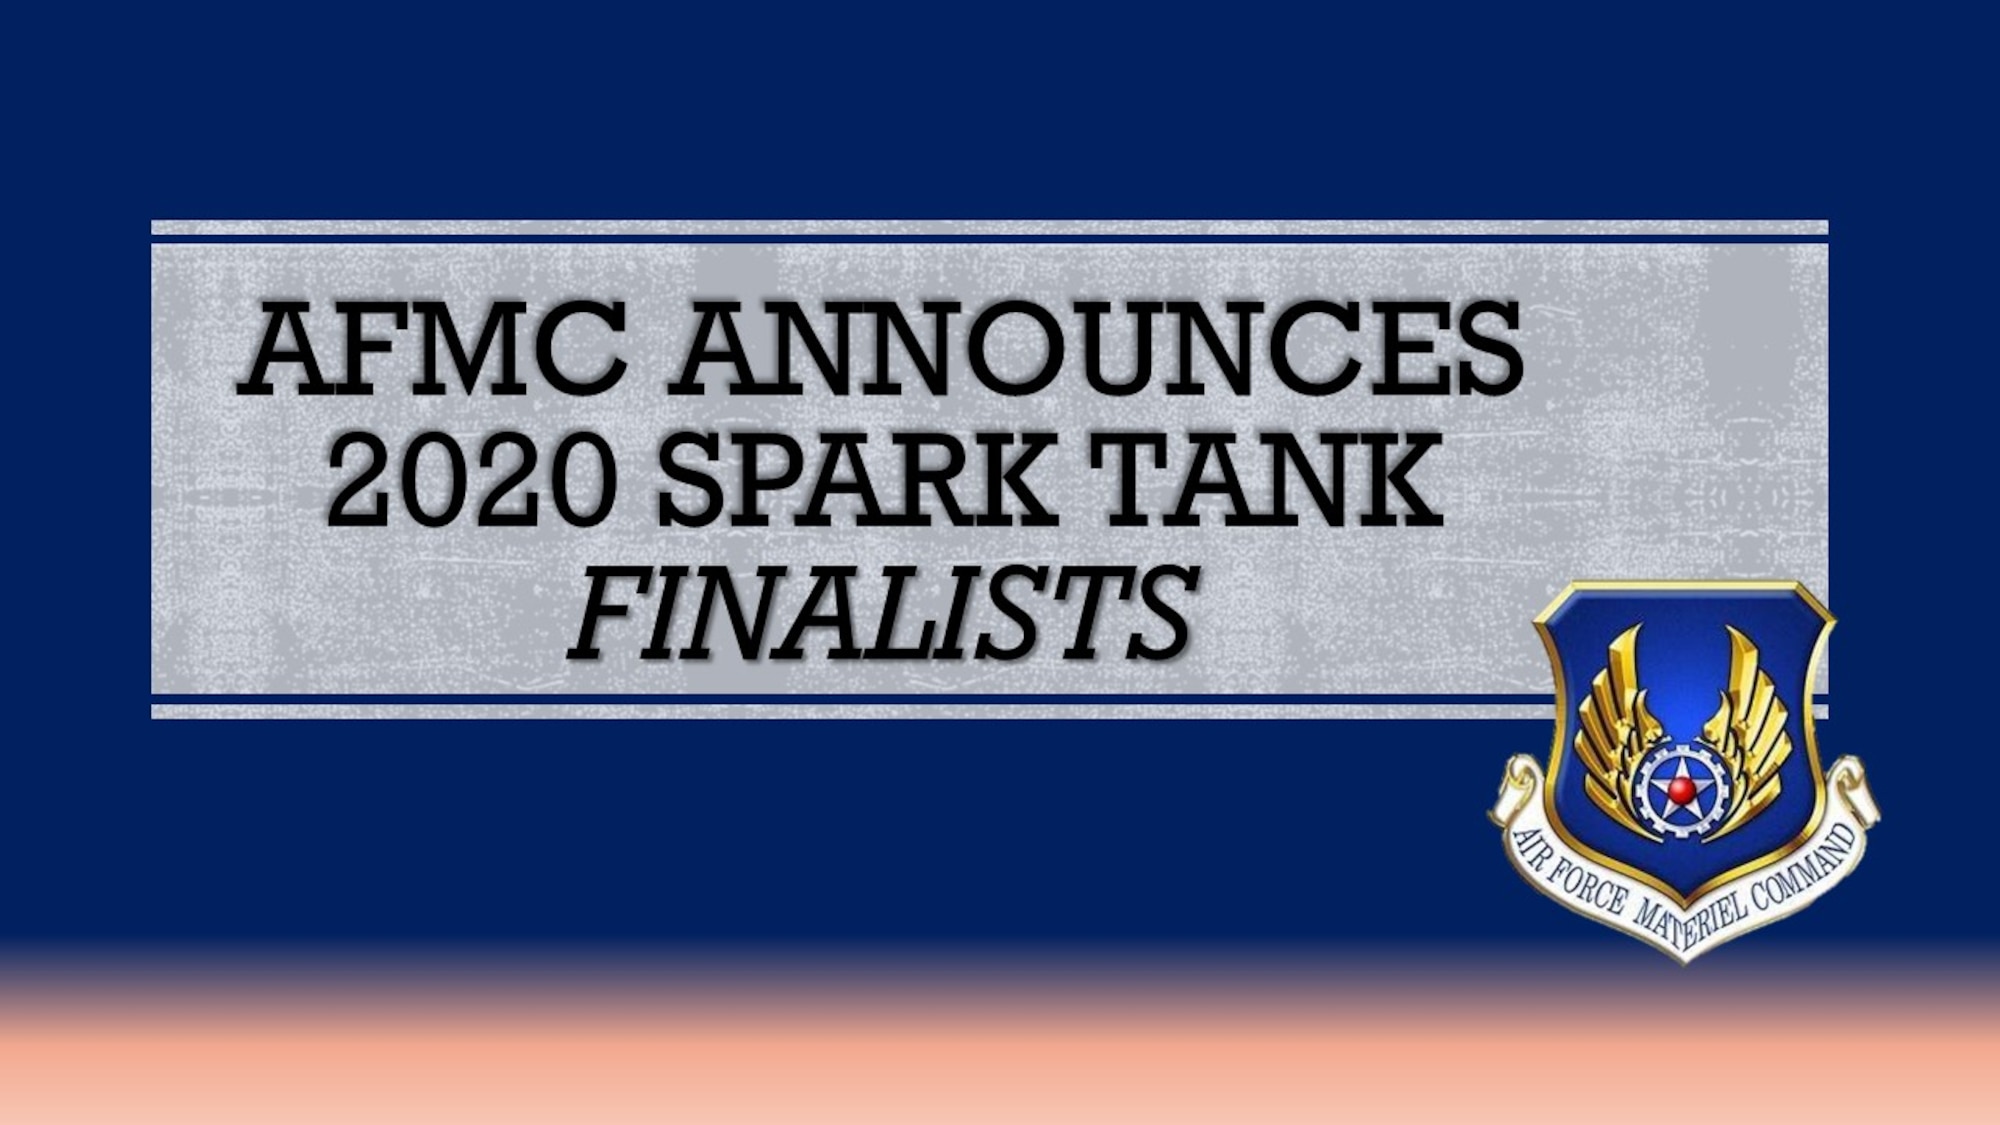 graphic for spark tank announcement